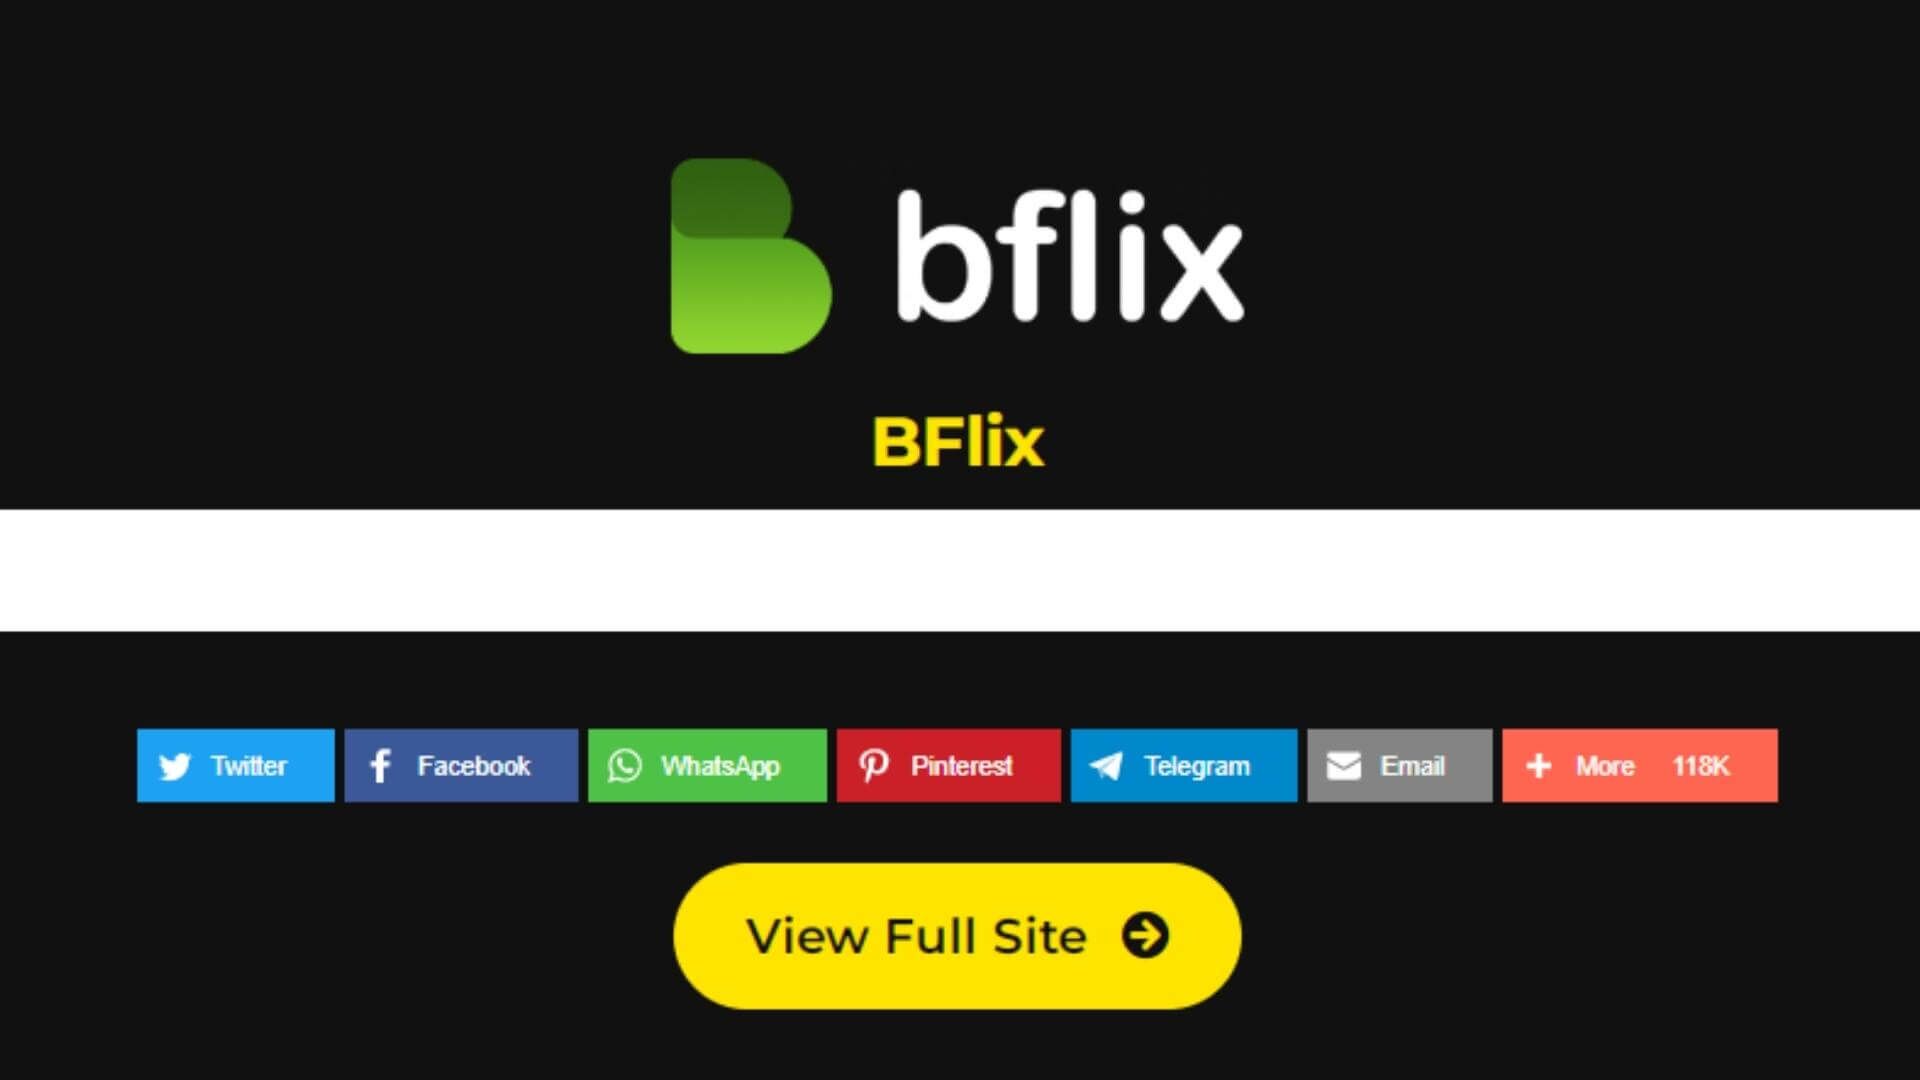 Bflix: Your One-Stop Site for Movies and TV Shows Streaming